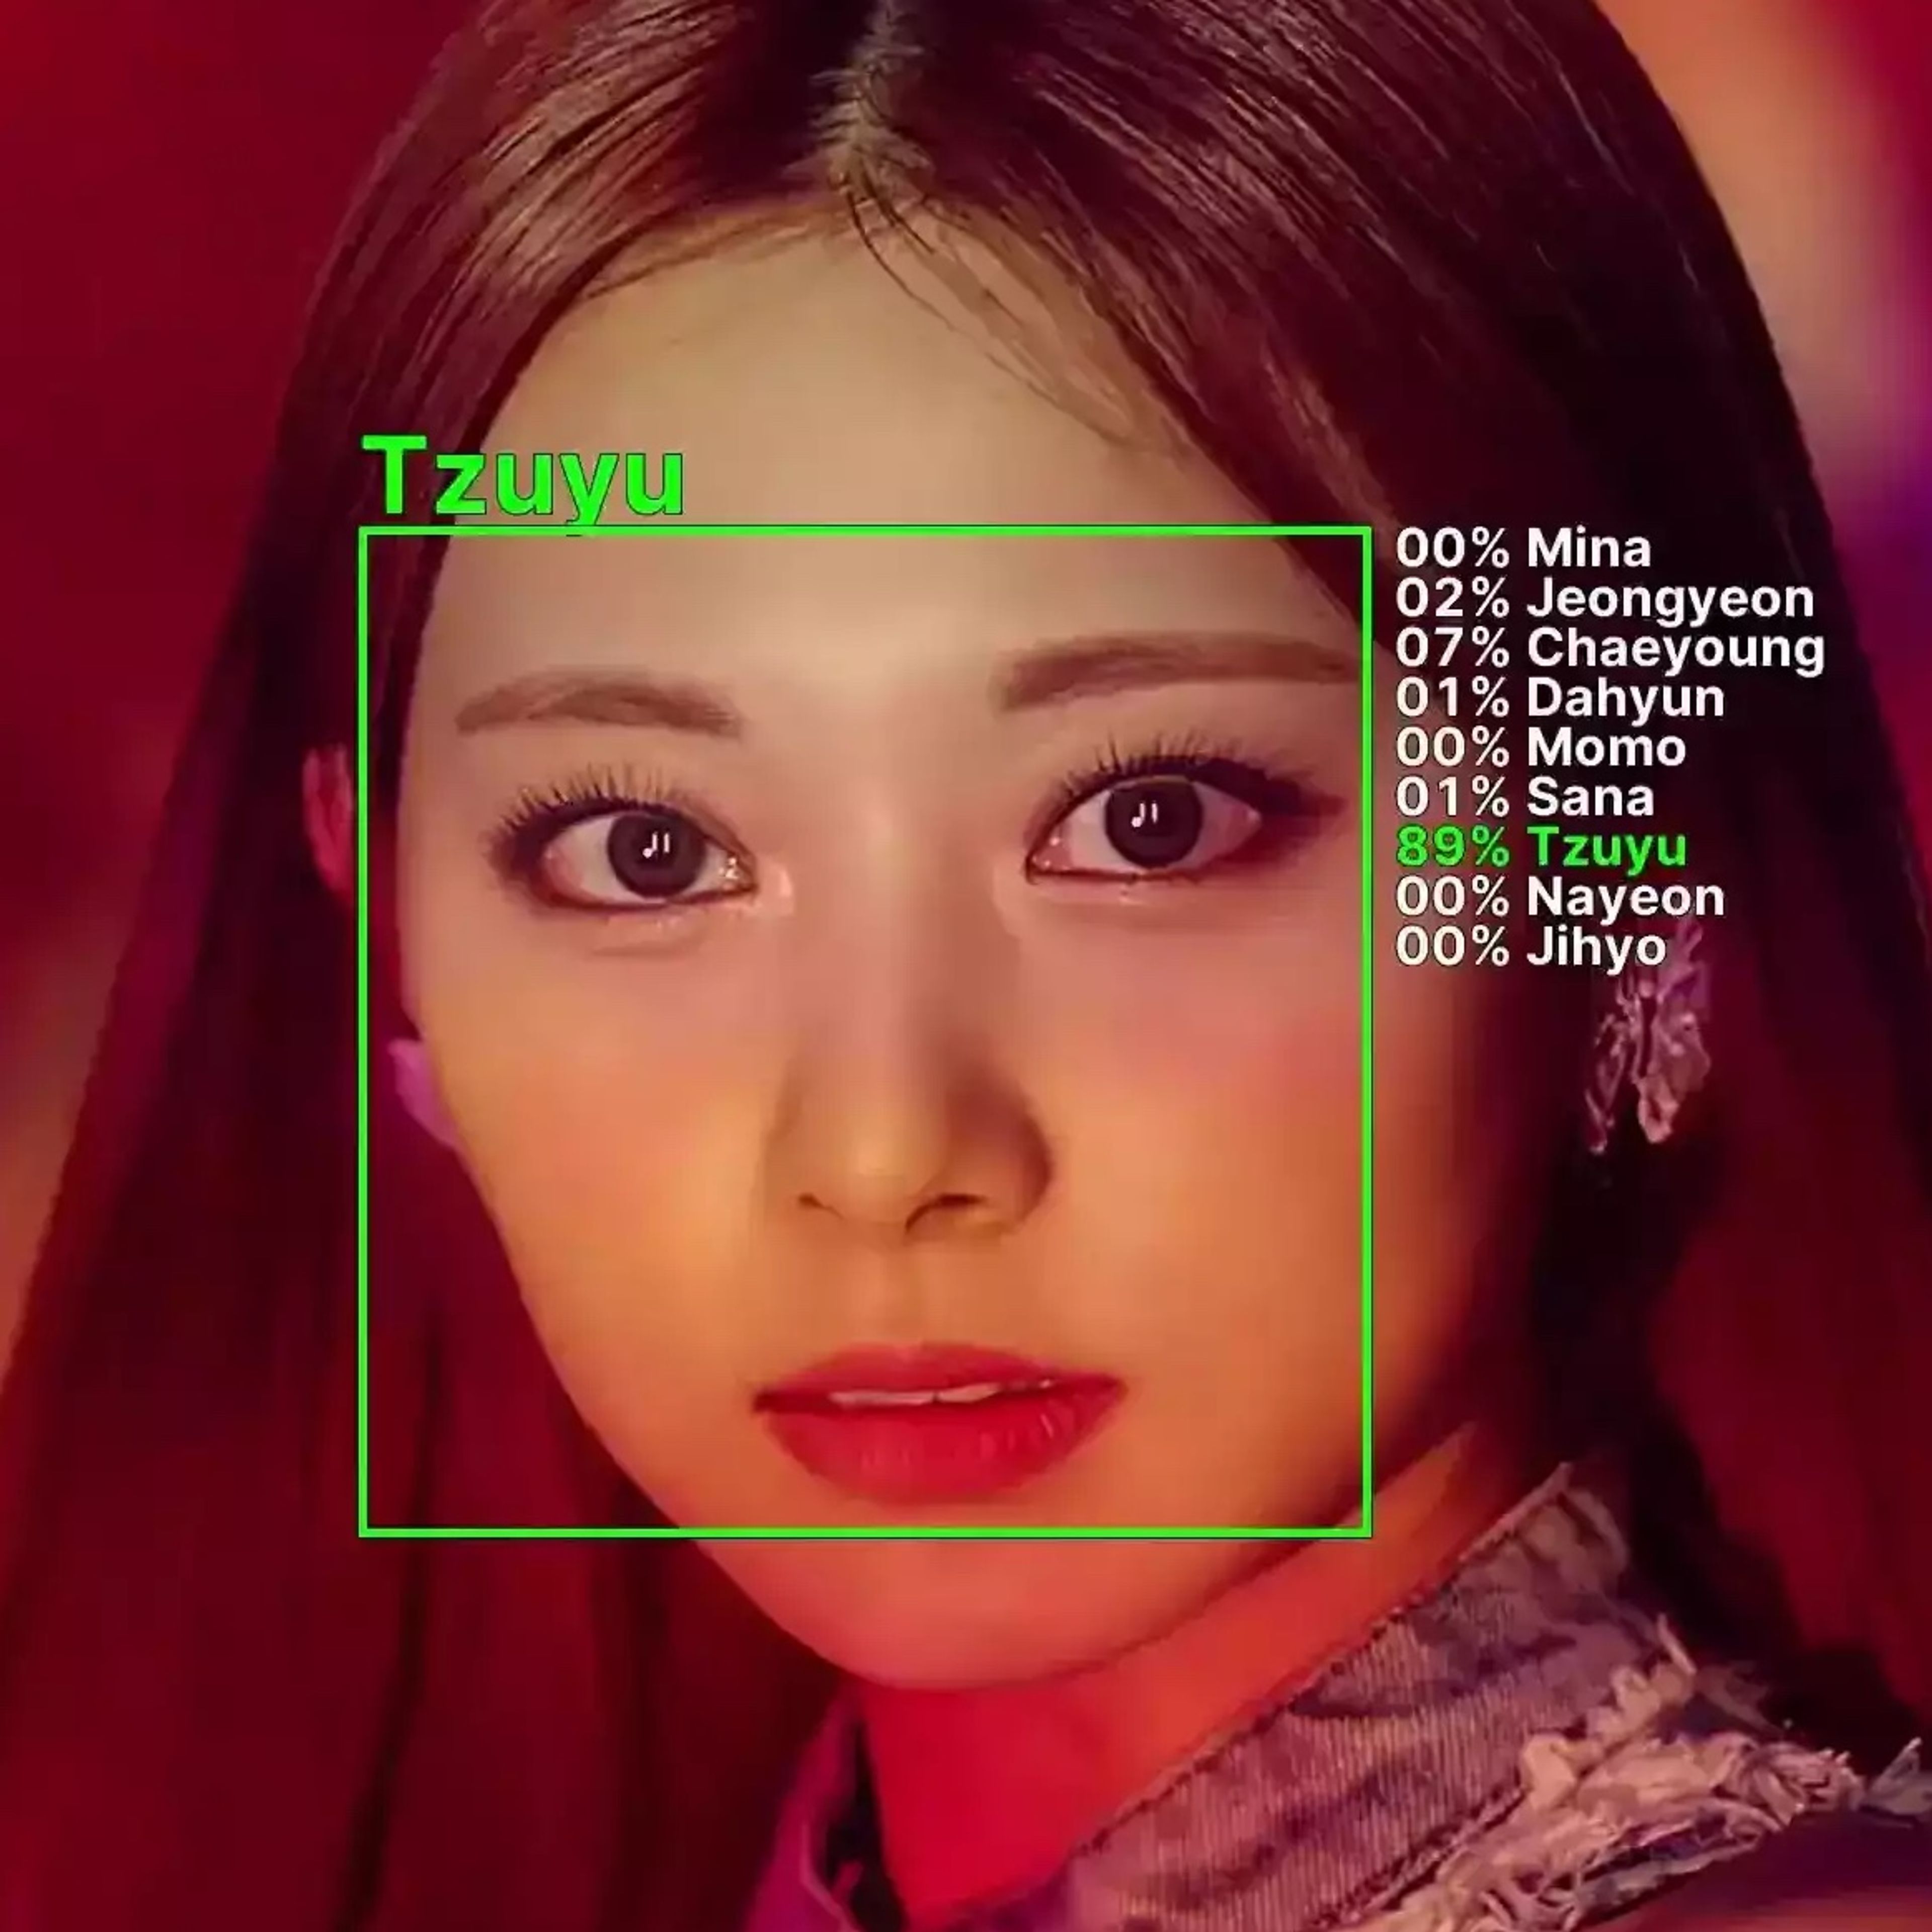 A picture of Tzuyu from TWICE. There is a green rectangle around her face, with text above it saying "Tzuyu". There is also more text to the right of her face. It is the list of confidences for each person in the model. Mina has a 0% confidence. Jeongyeon has a 2% confidence. Chaeyoung has a 7% confidence. Dahyun has a 1% confidence. Momo has a 0% confidence. Sana has a 1% confidence. Tzuyu has a 89% confidence. Nayeon has a 0% confidence. Jihyo has a 0% confidence.